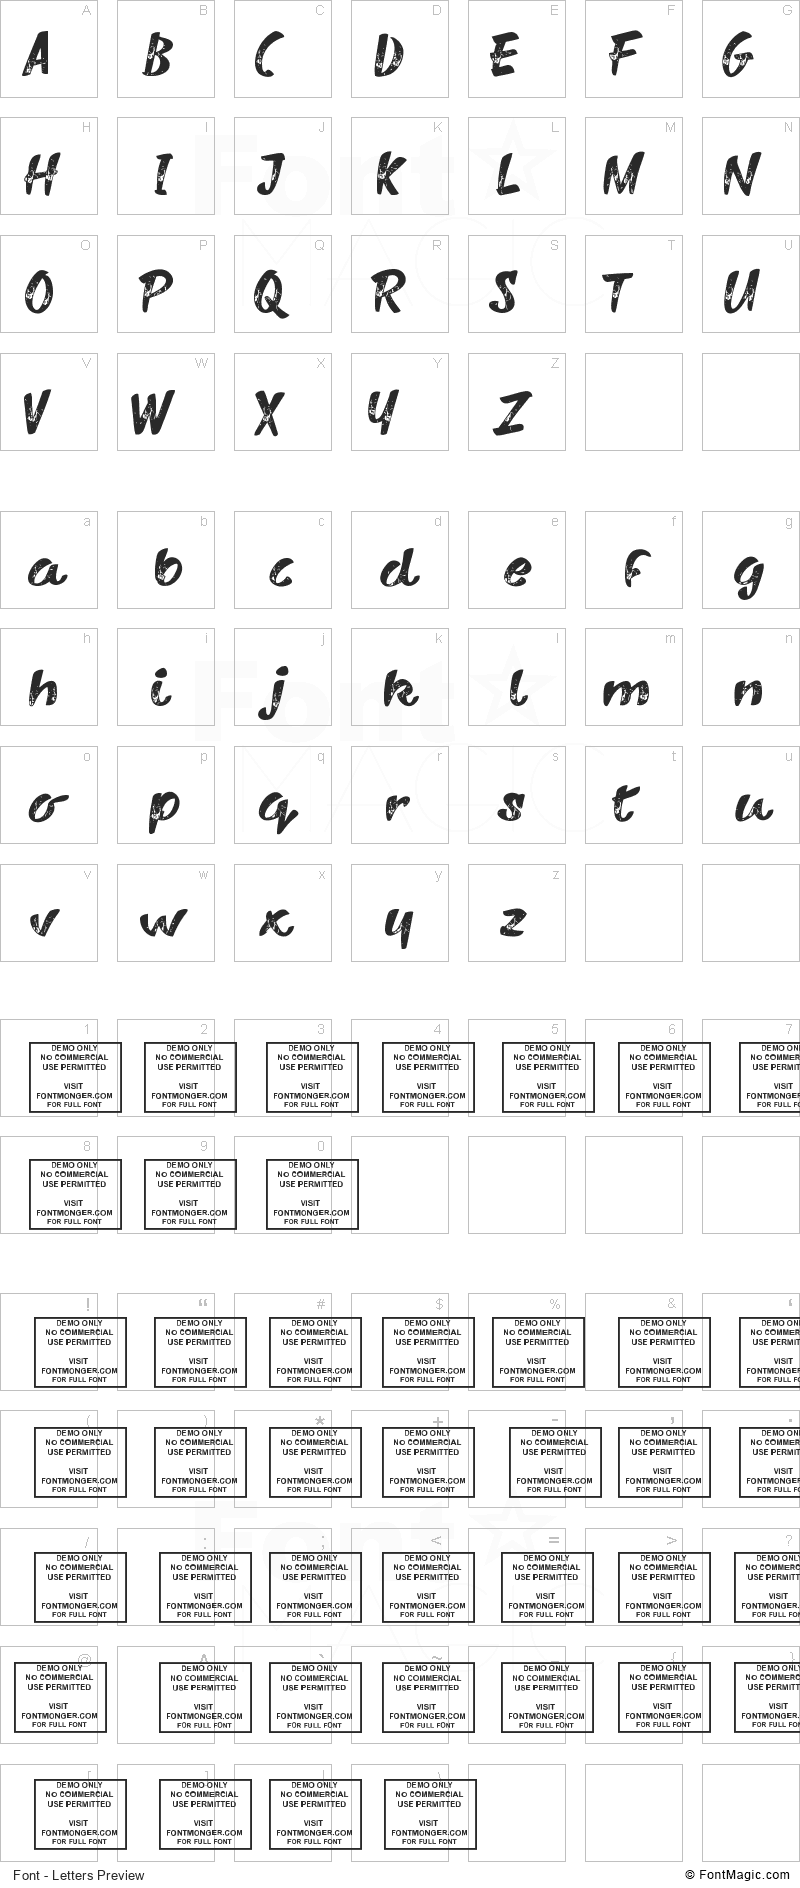 Vary Sharky Font - All Latters Preview Chart